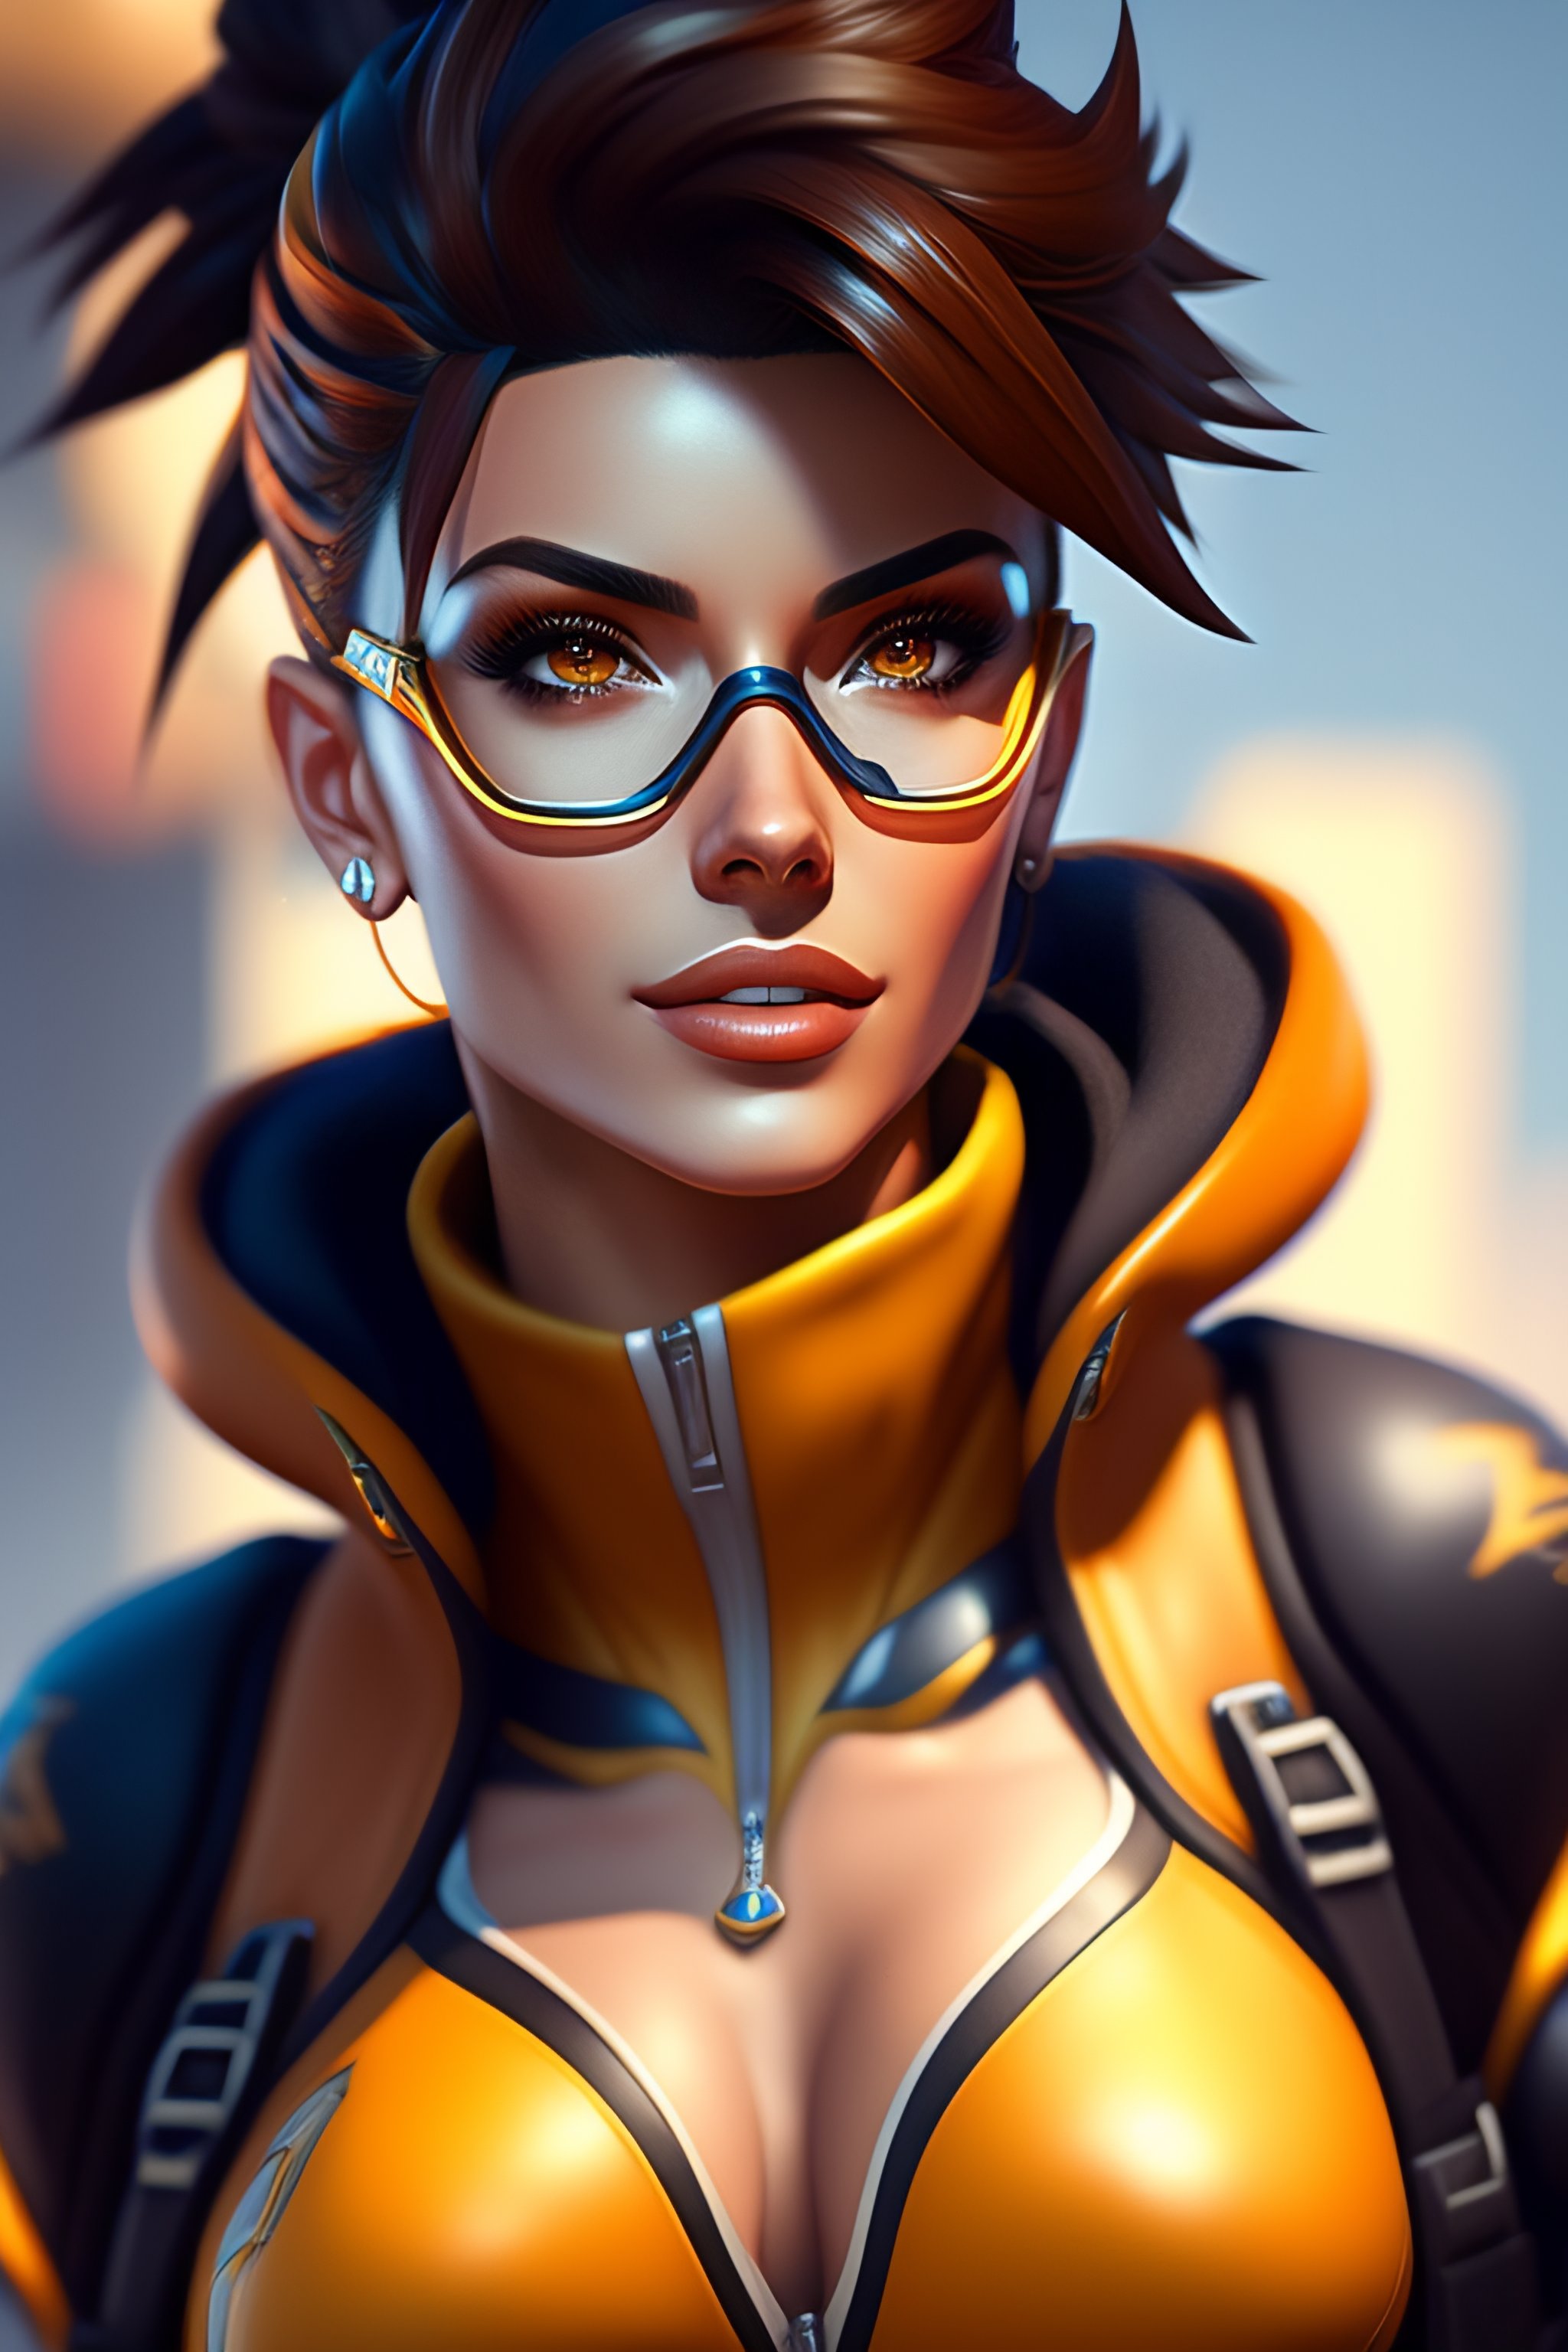 Lexica - Tracer from overwatch, highly detailed, otrn clothes